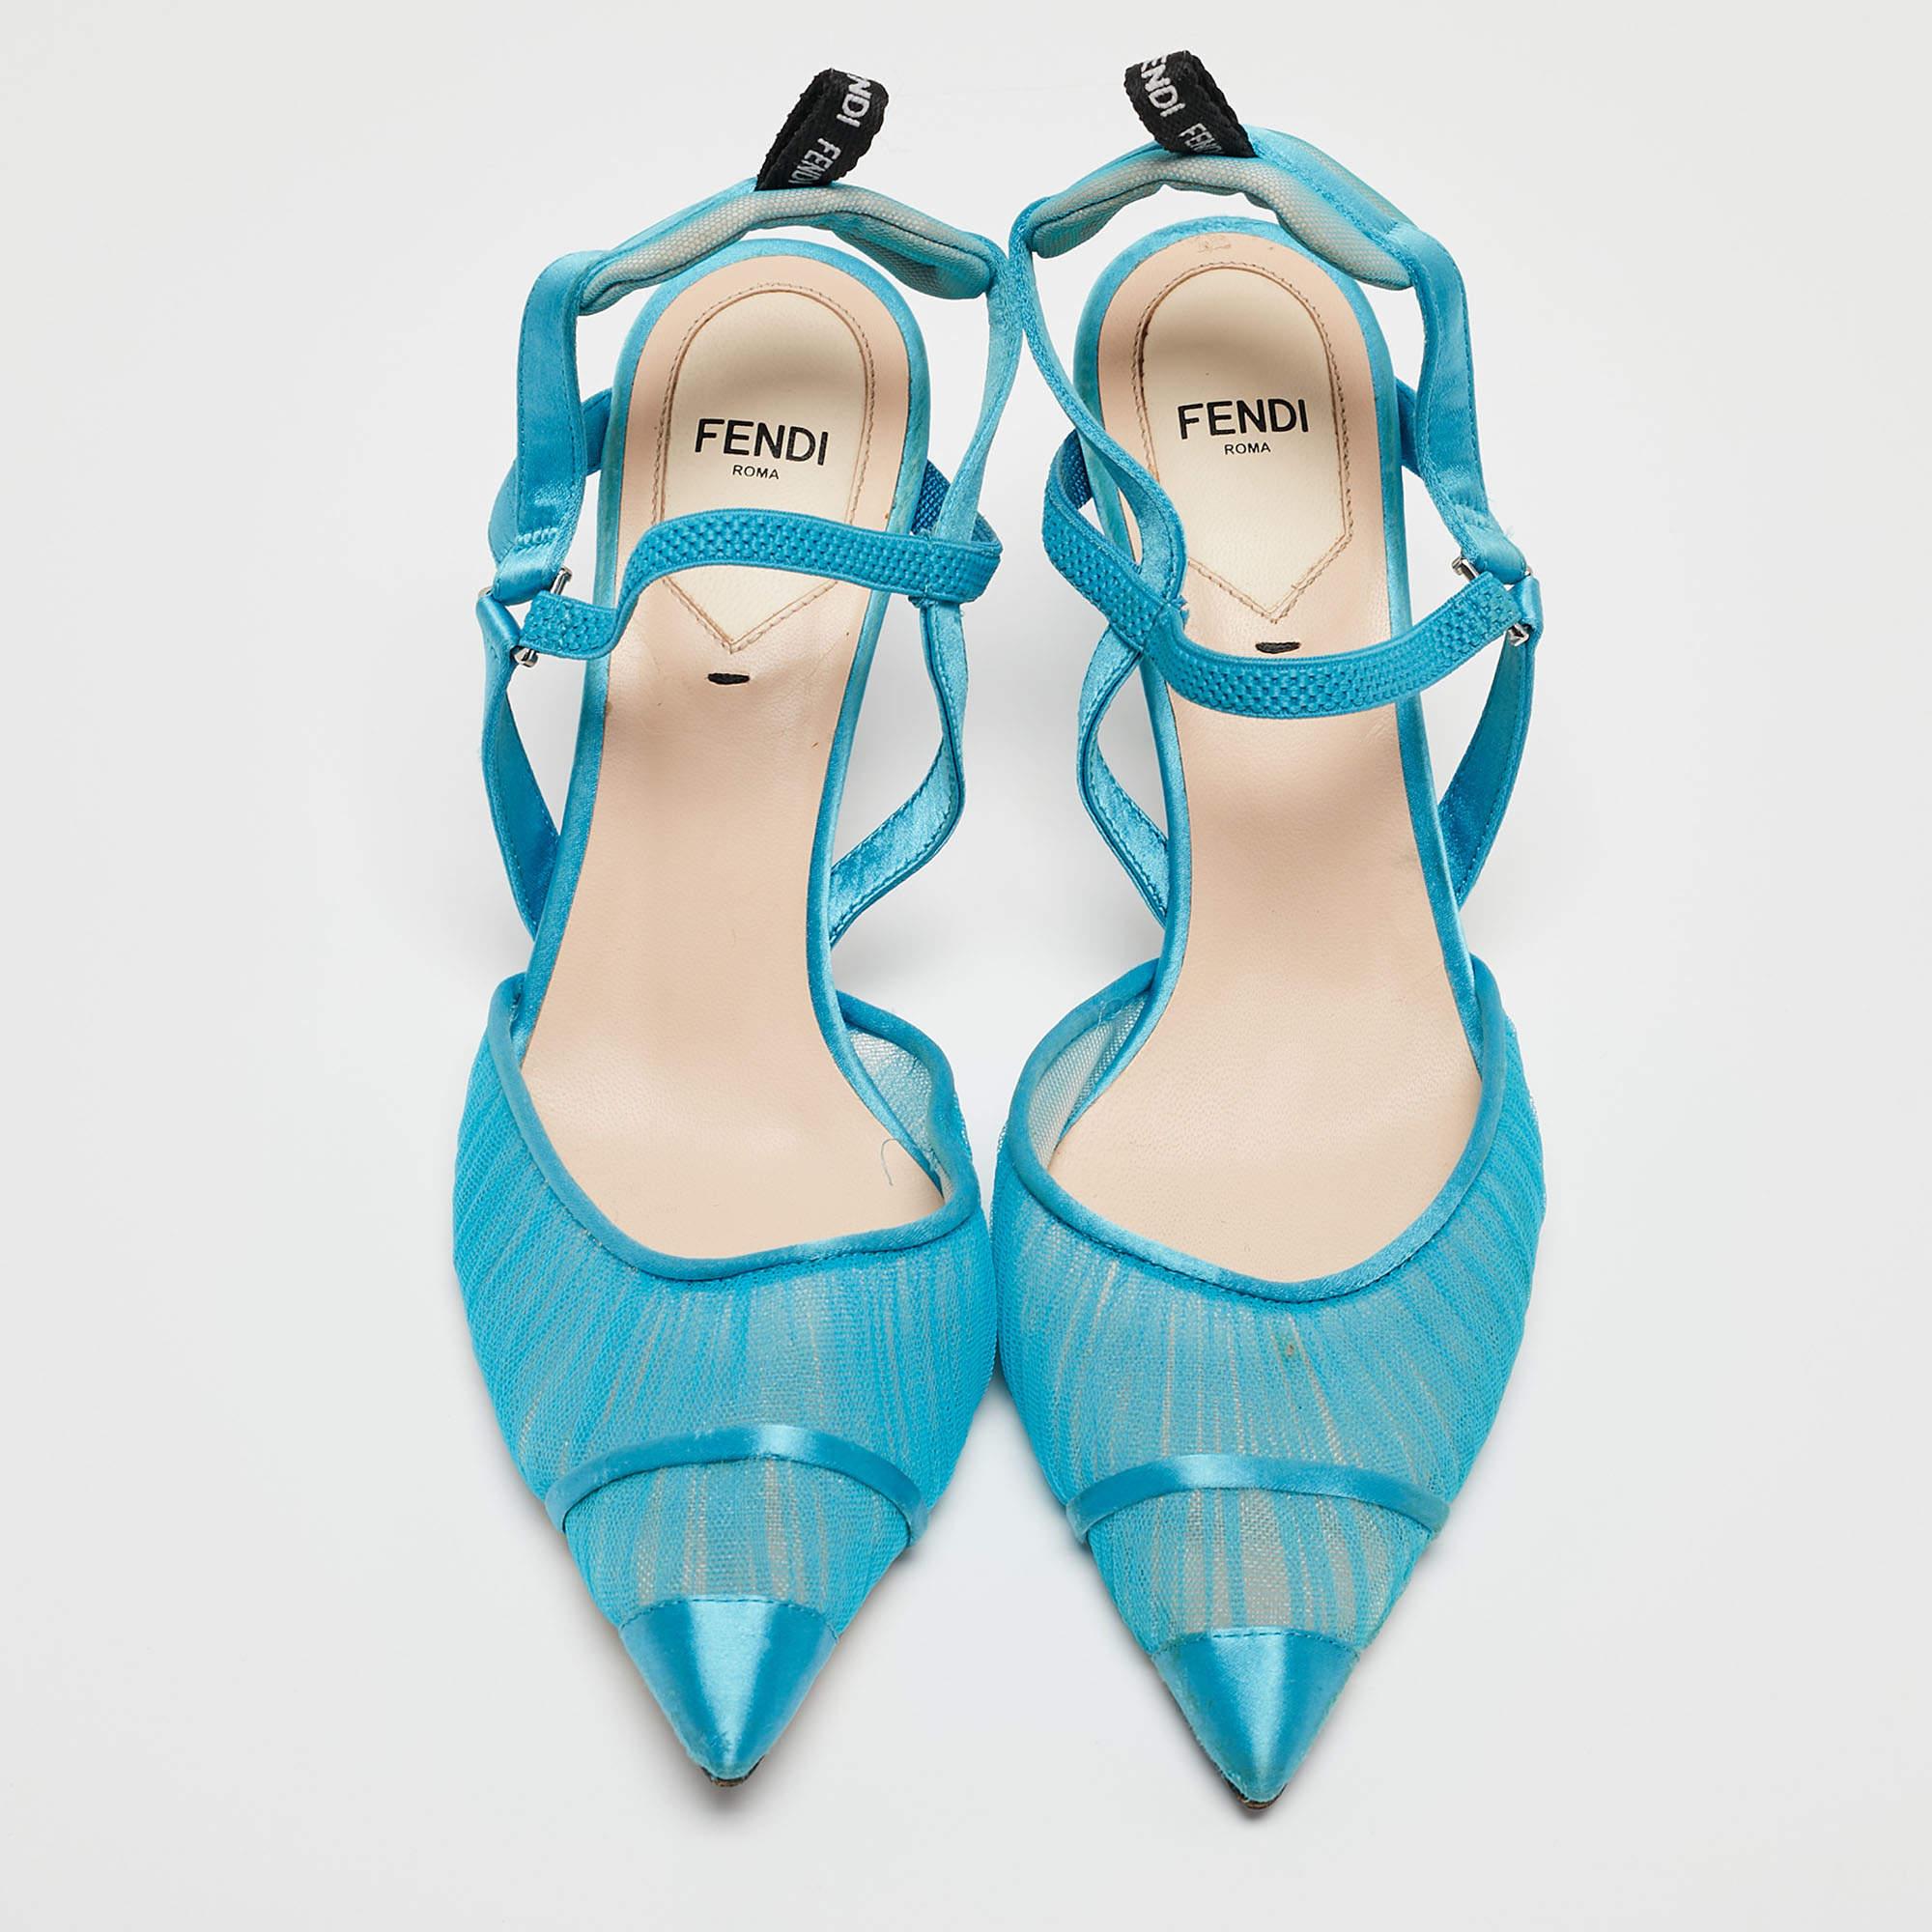 Wonderfully crafted shoes added with notable elements to fit well and pair perfectly with all your plans. Make these Fendi blue pumps yours today!

